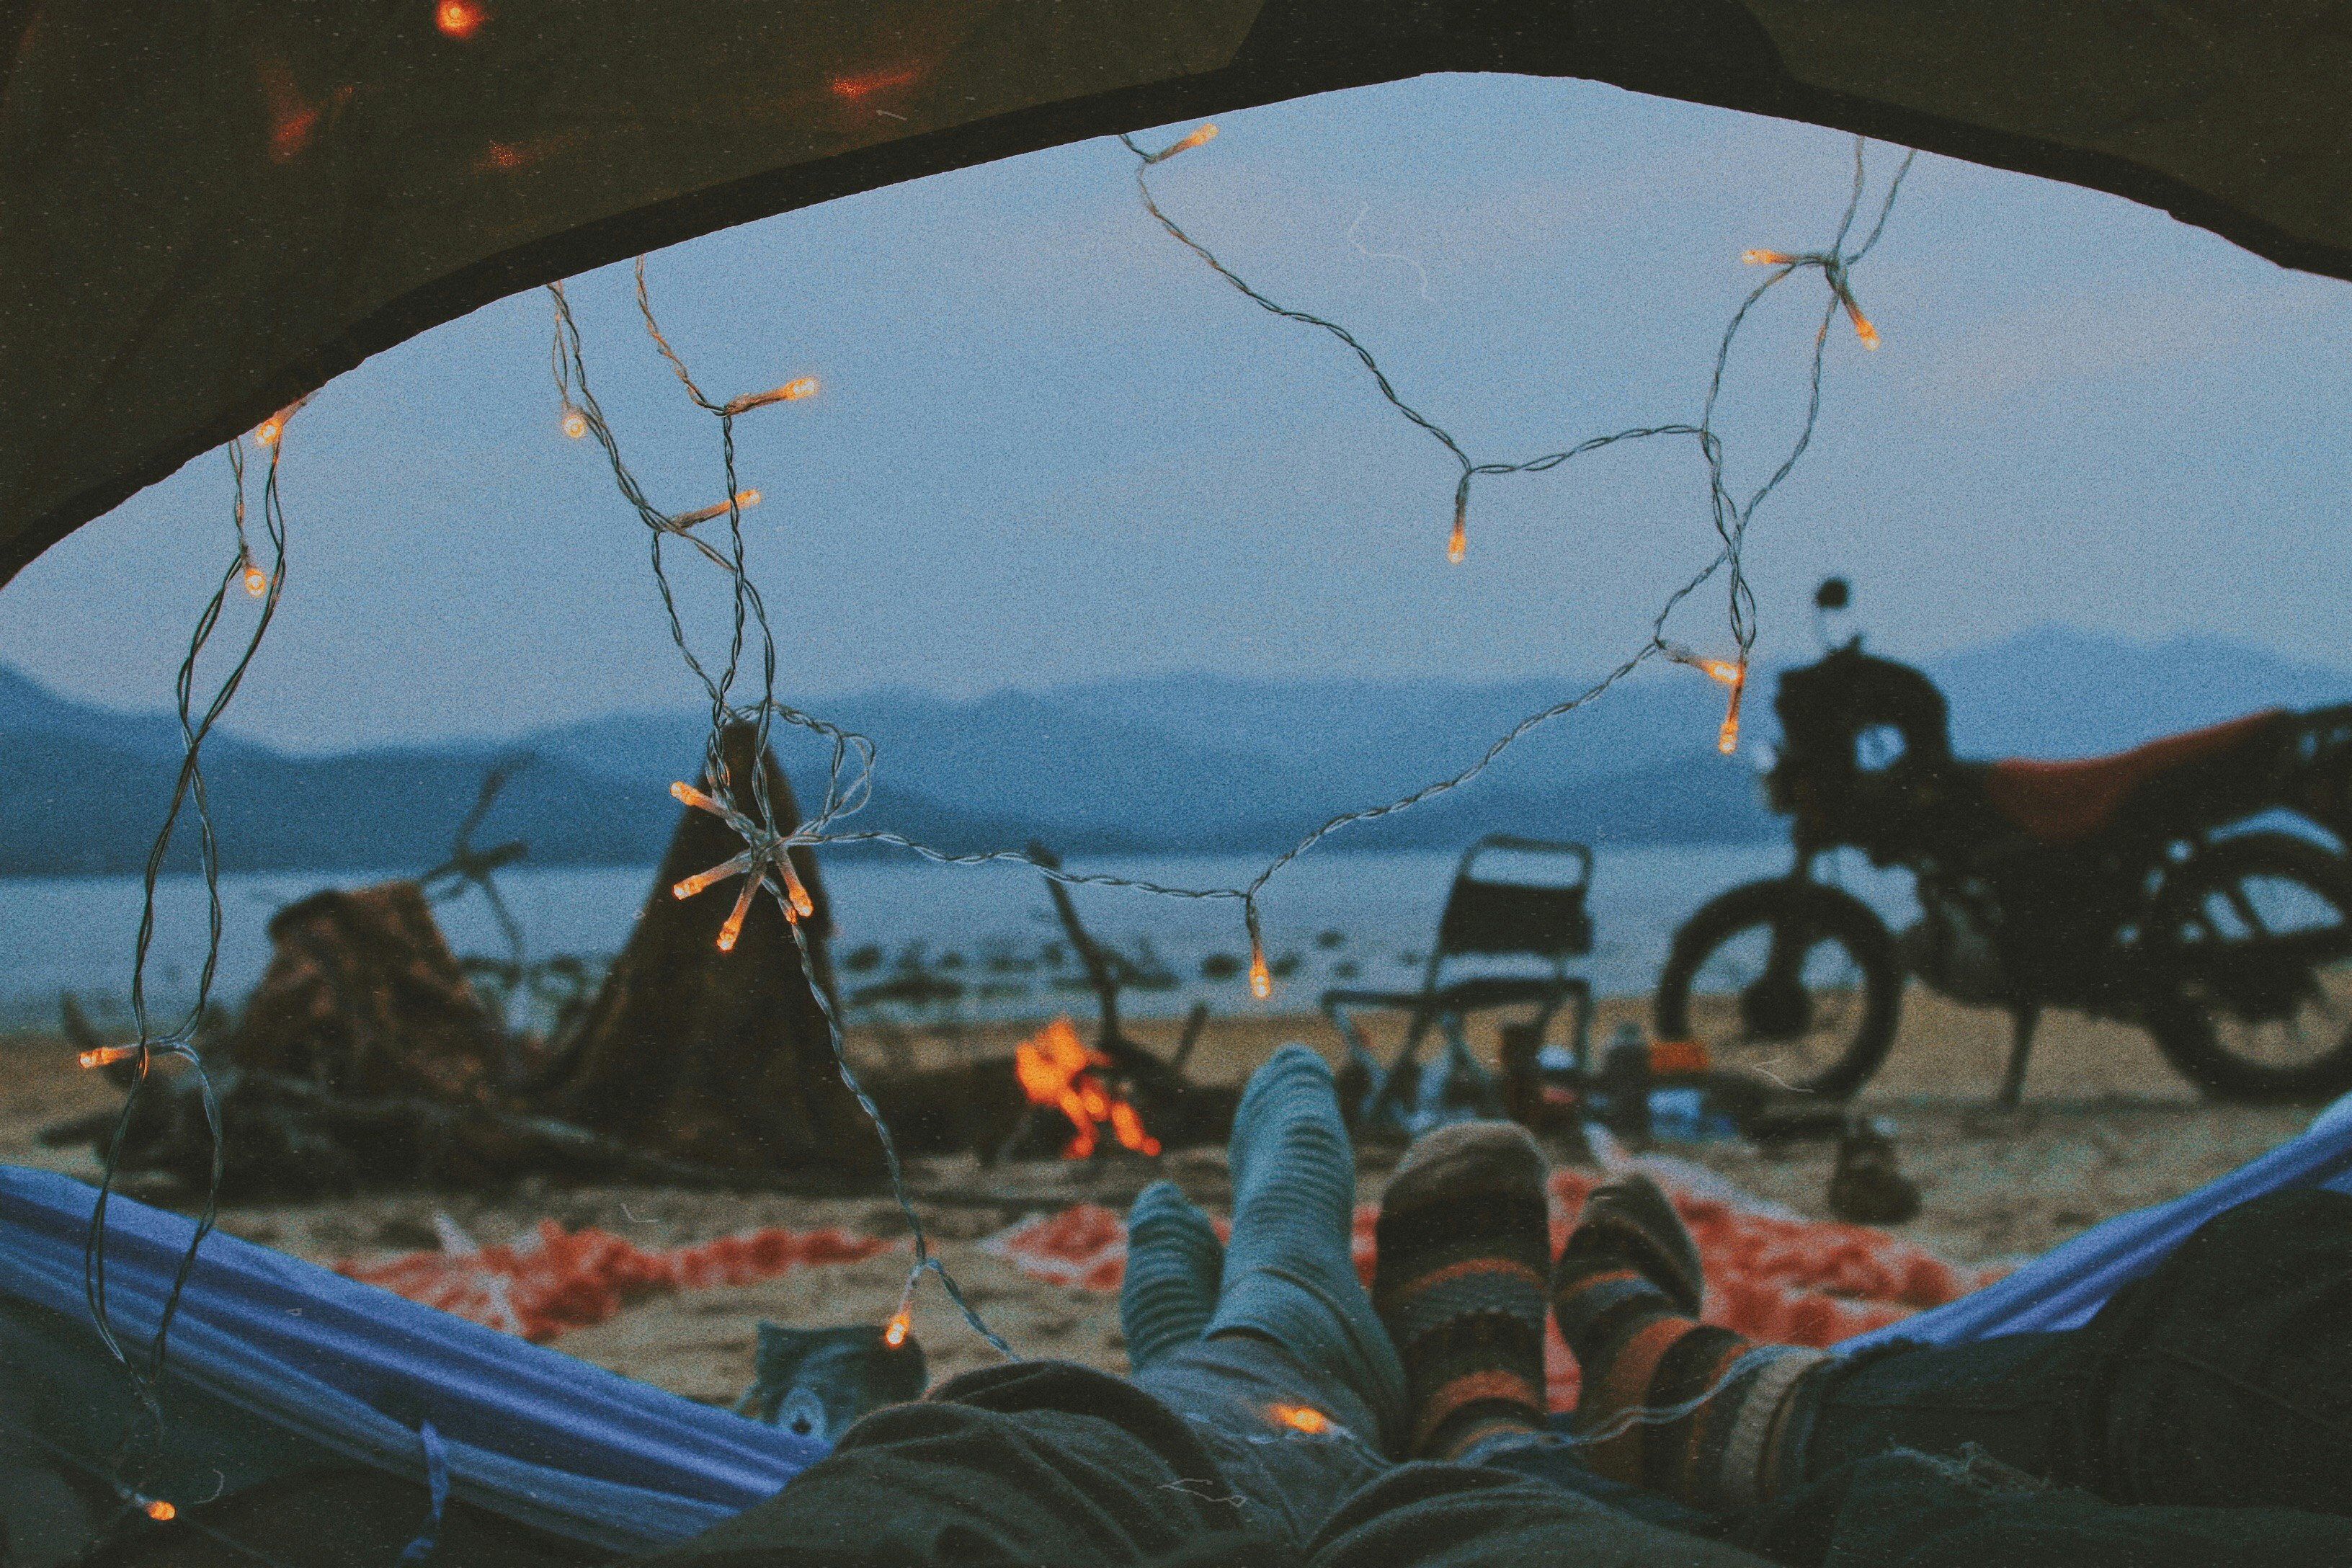 david denomme recommends Swinger Camping Tumblr